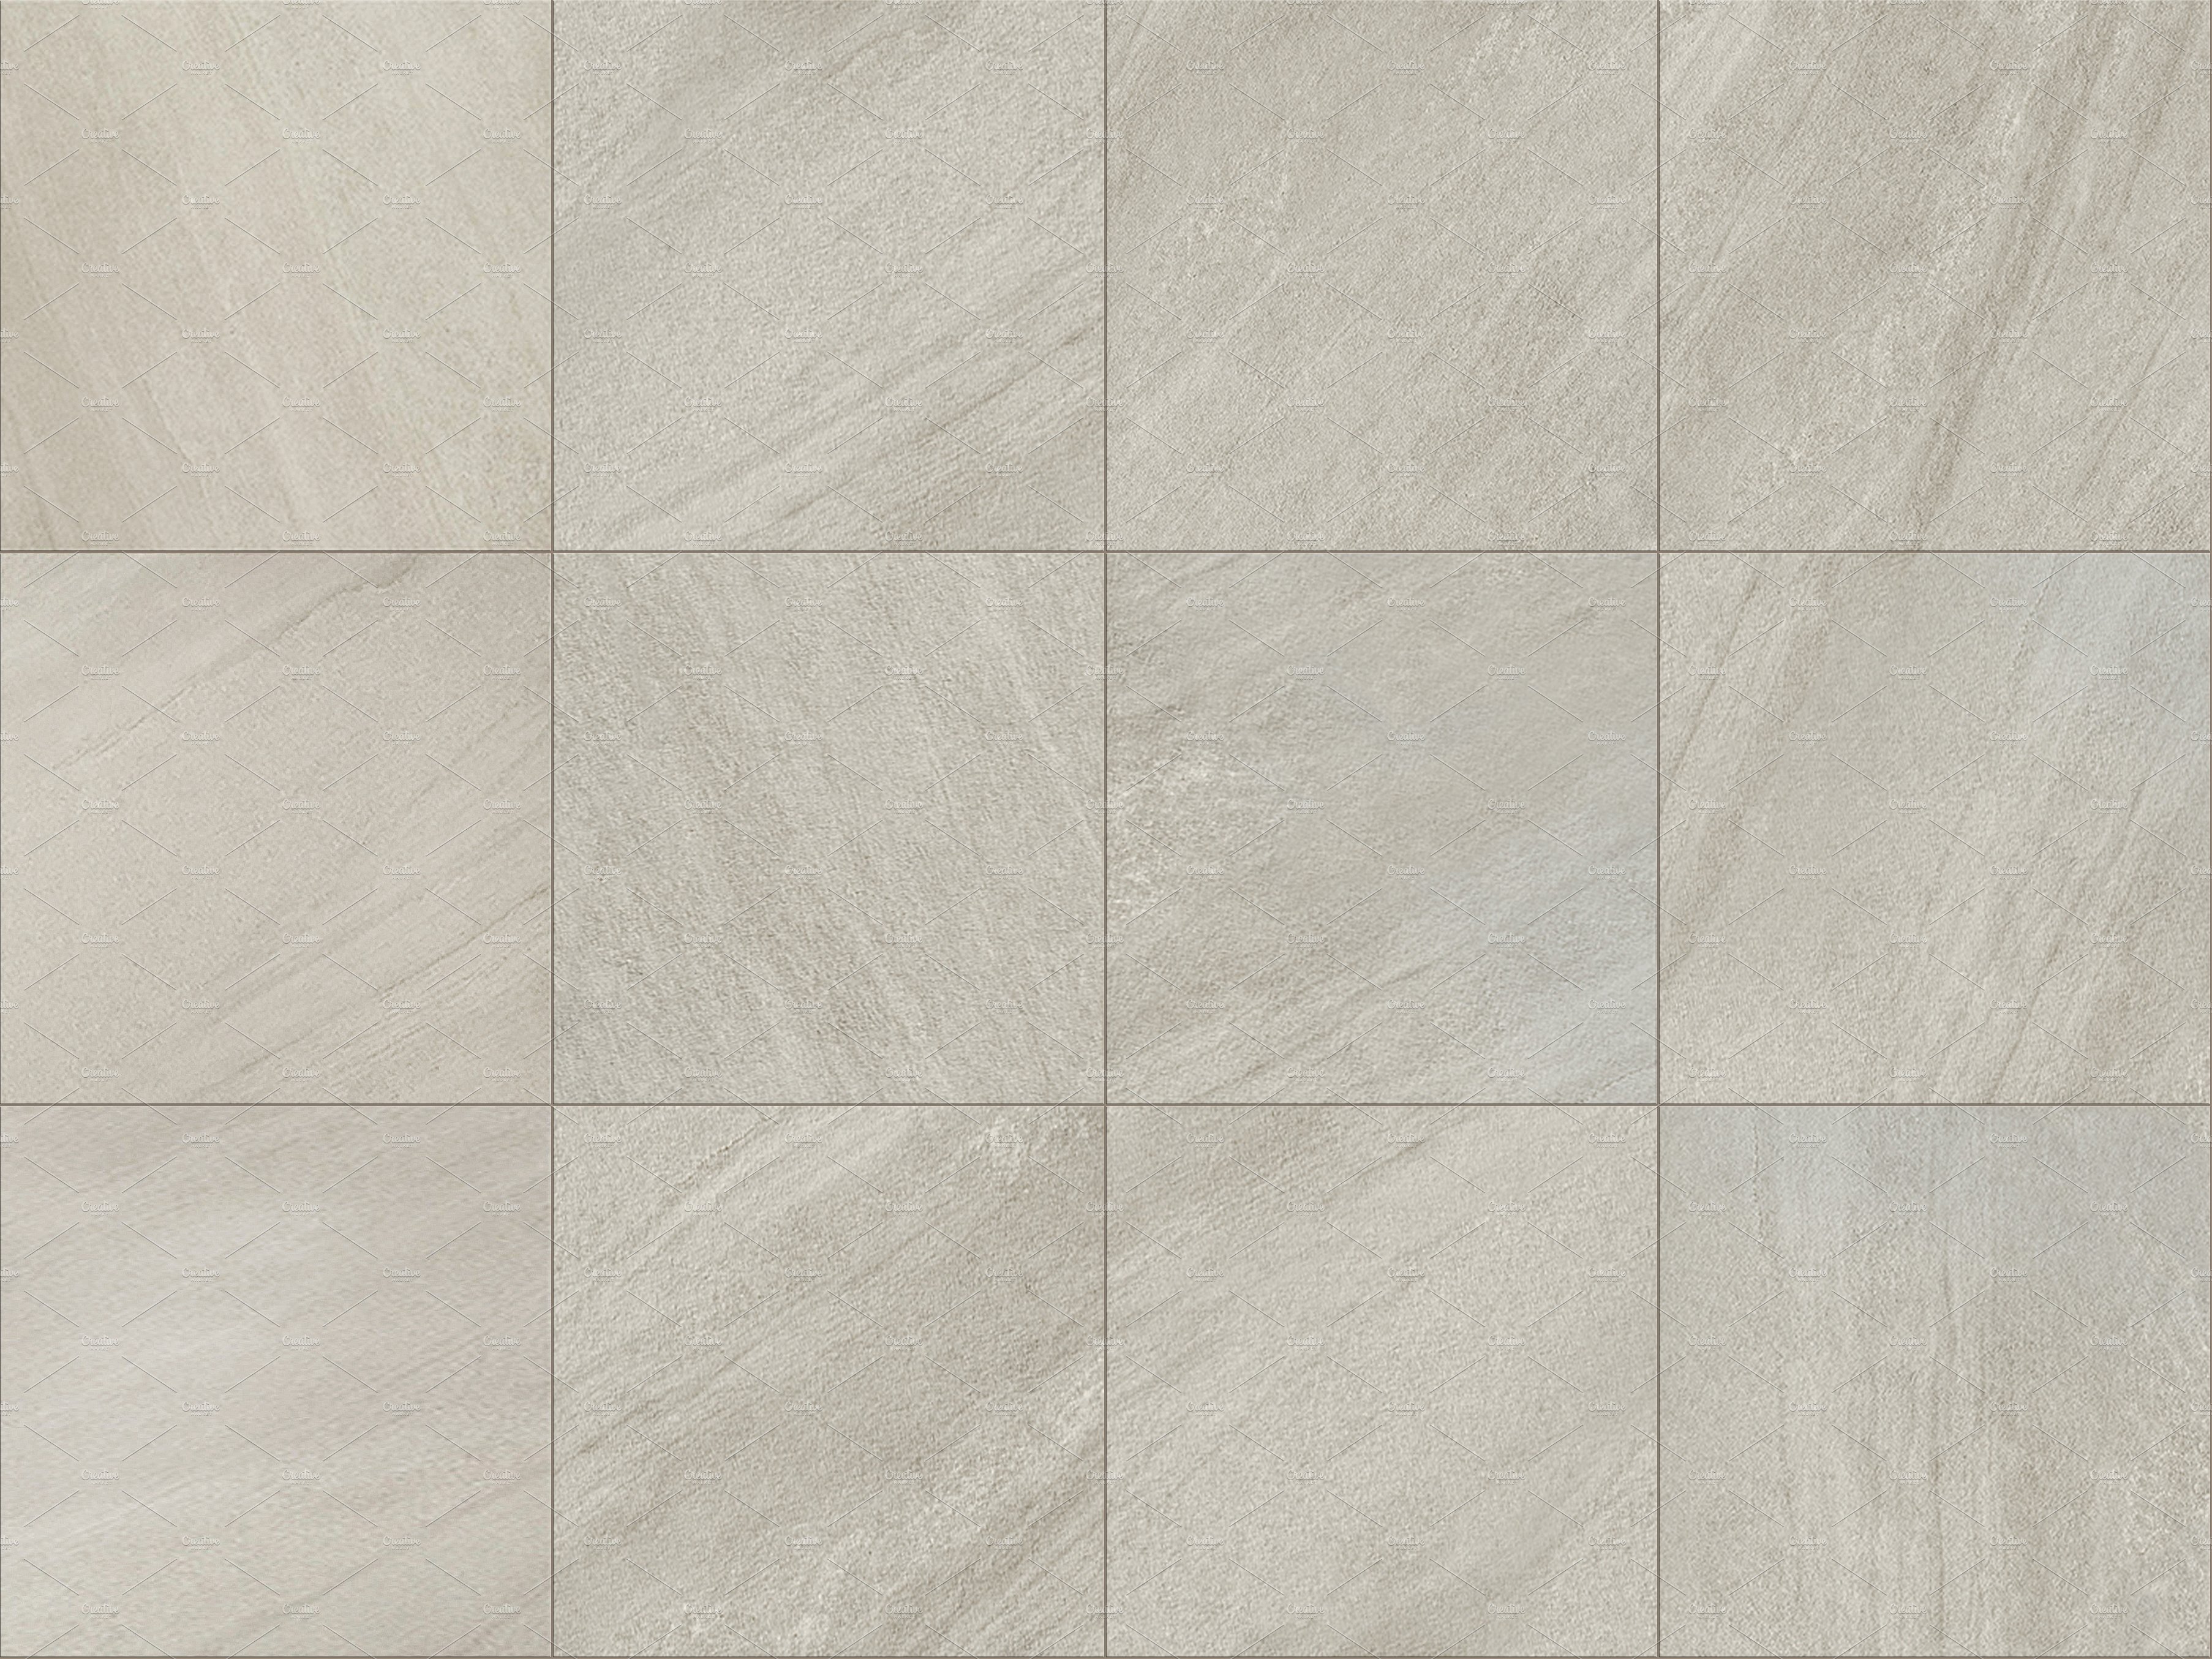 Porcelain wall tile seamless texture cover image.